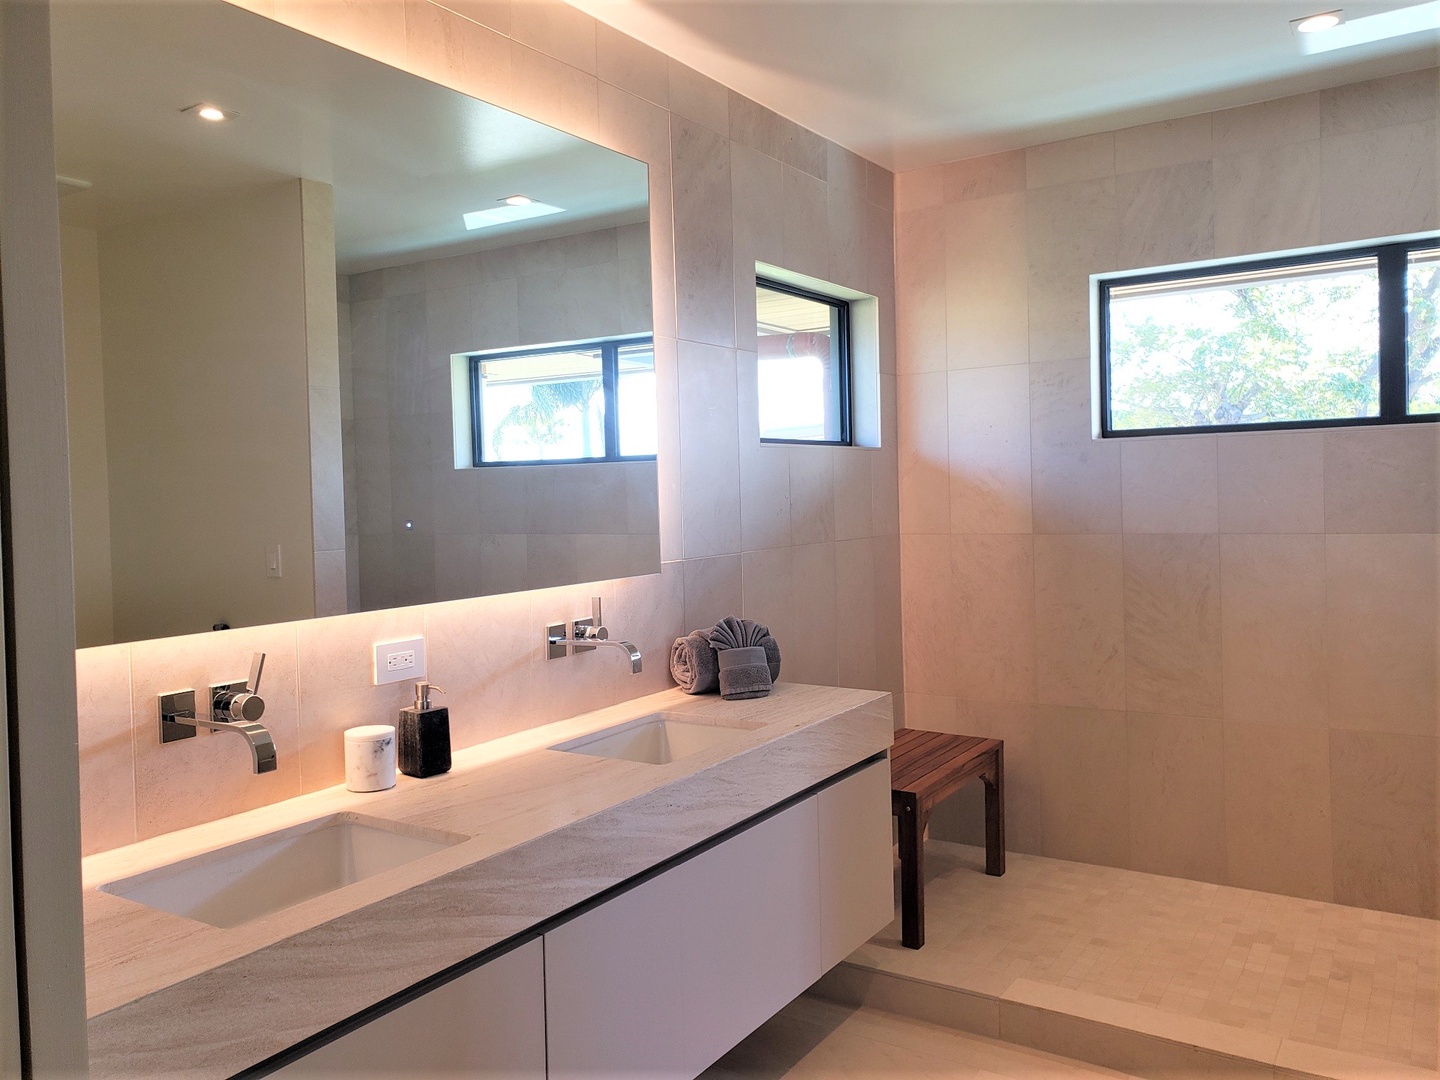 Kamuela Vacation Rentals, Hapuna Estates #8 - The ensuite bath has an extra large walk in showerr, dual vanities and large walk in closet